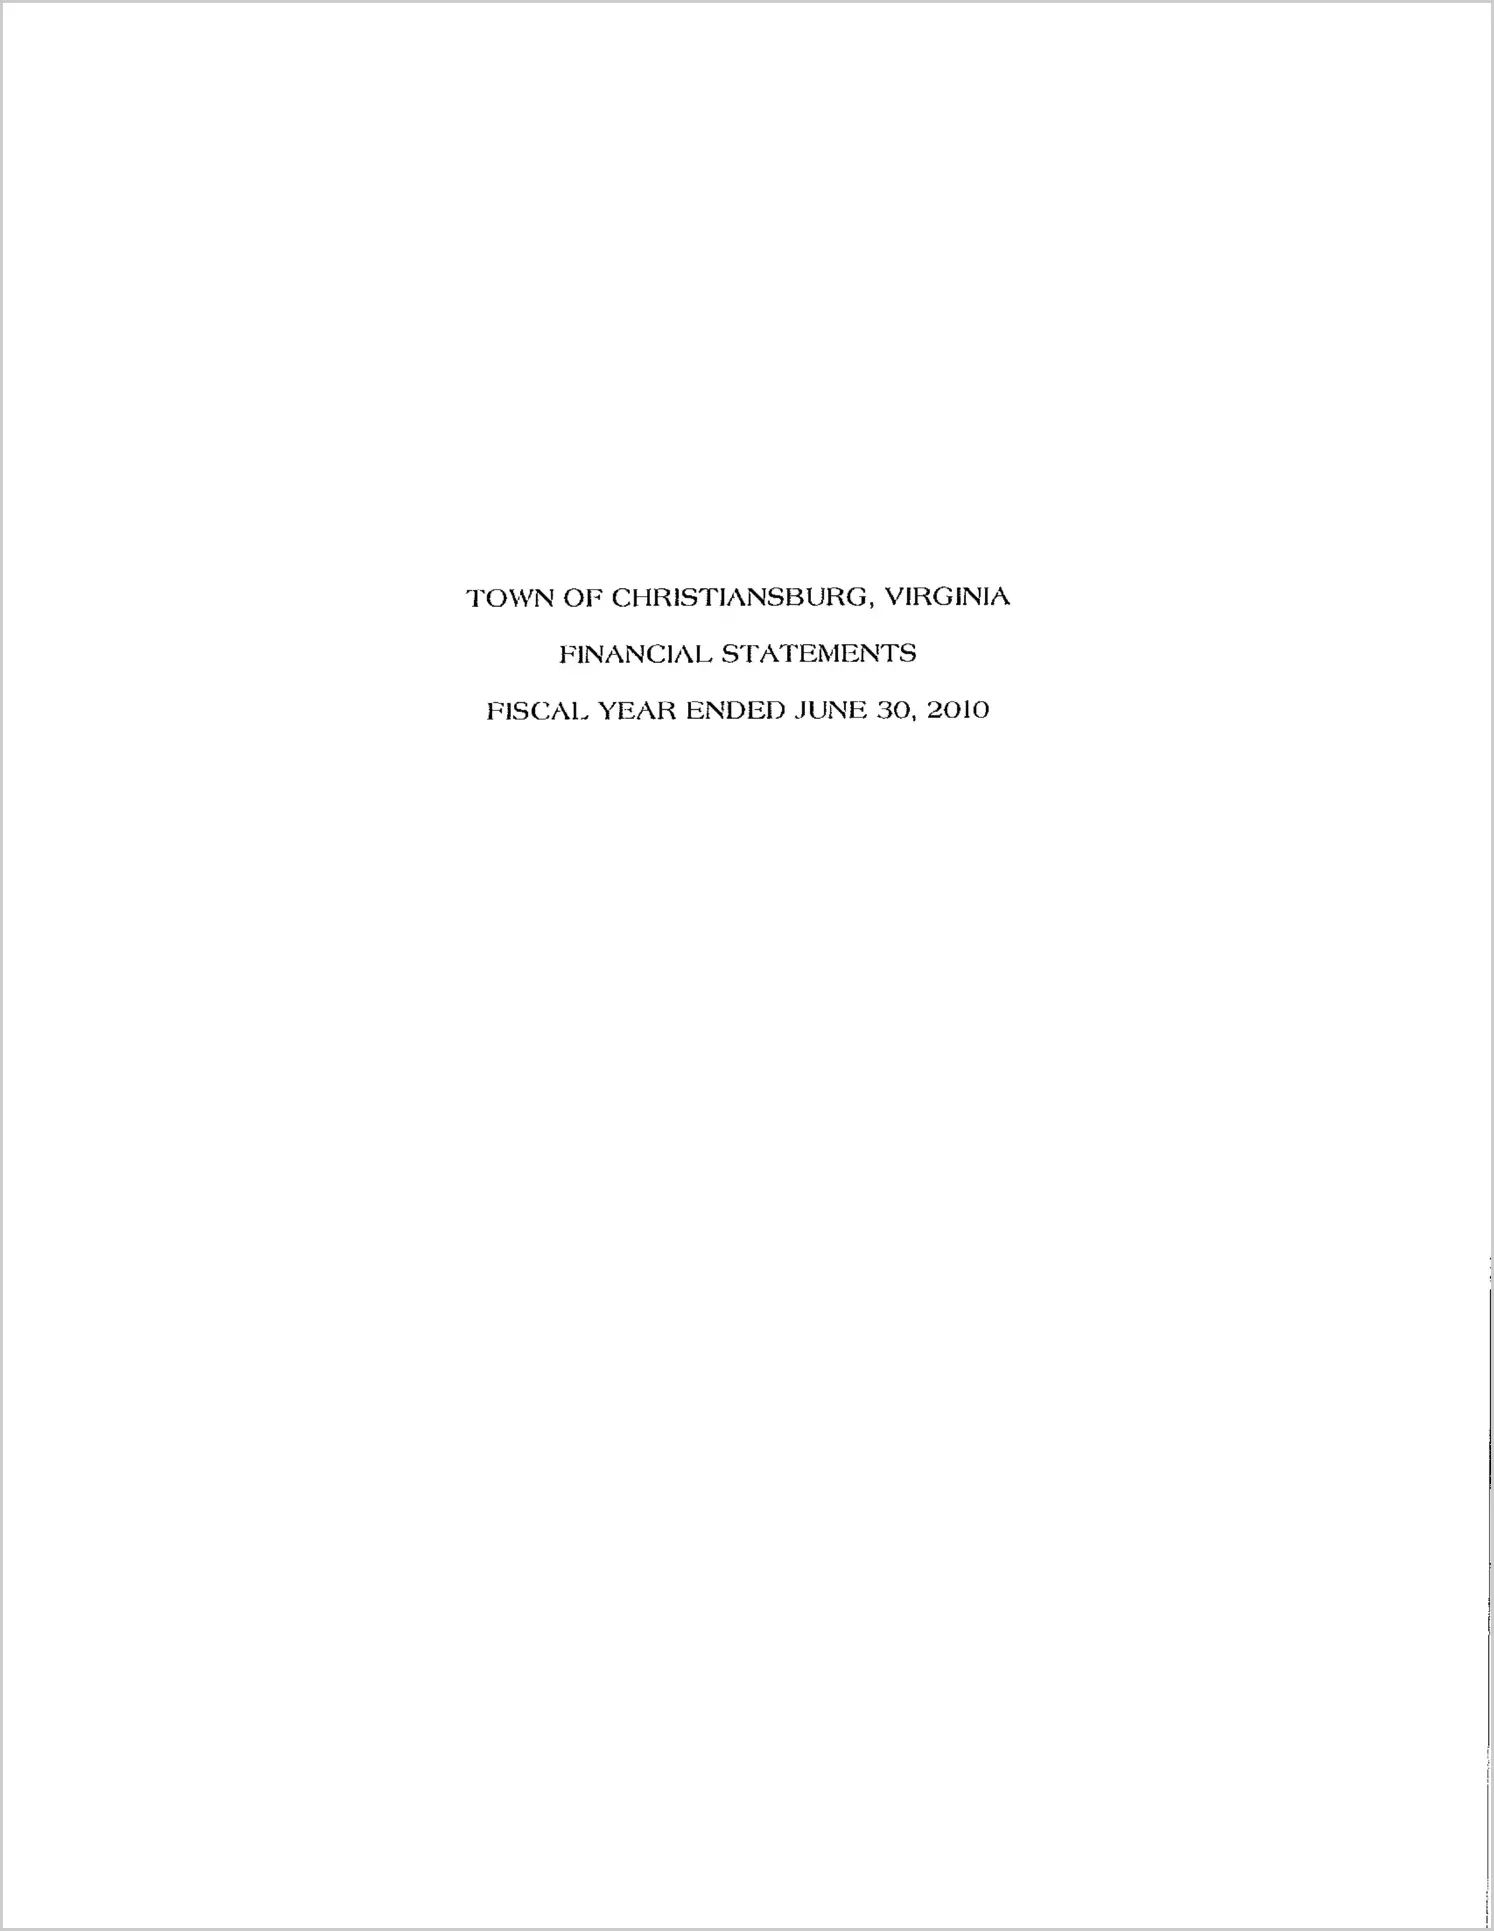 2010 Annual Financial Report for Town of Christiansburg